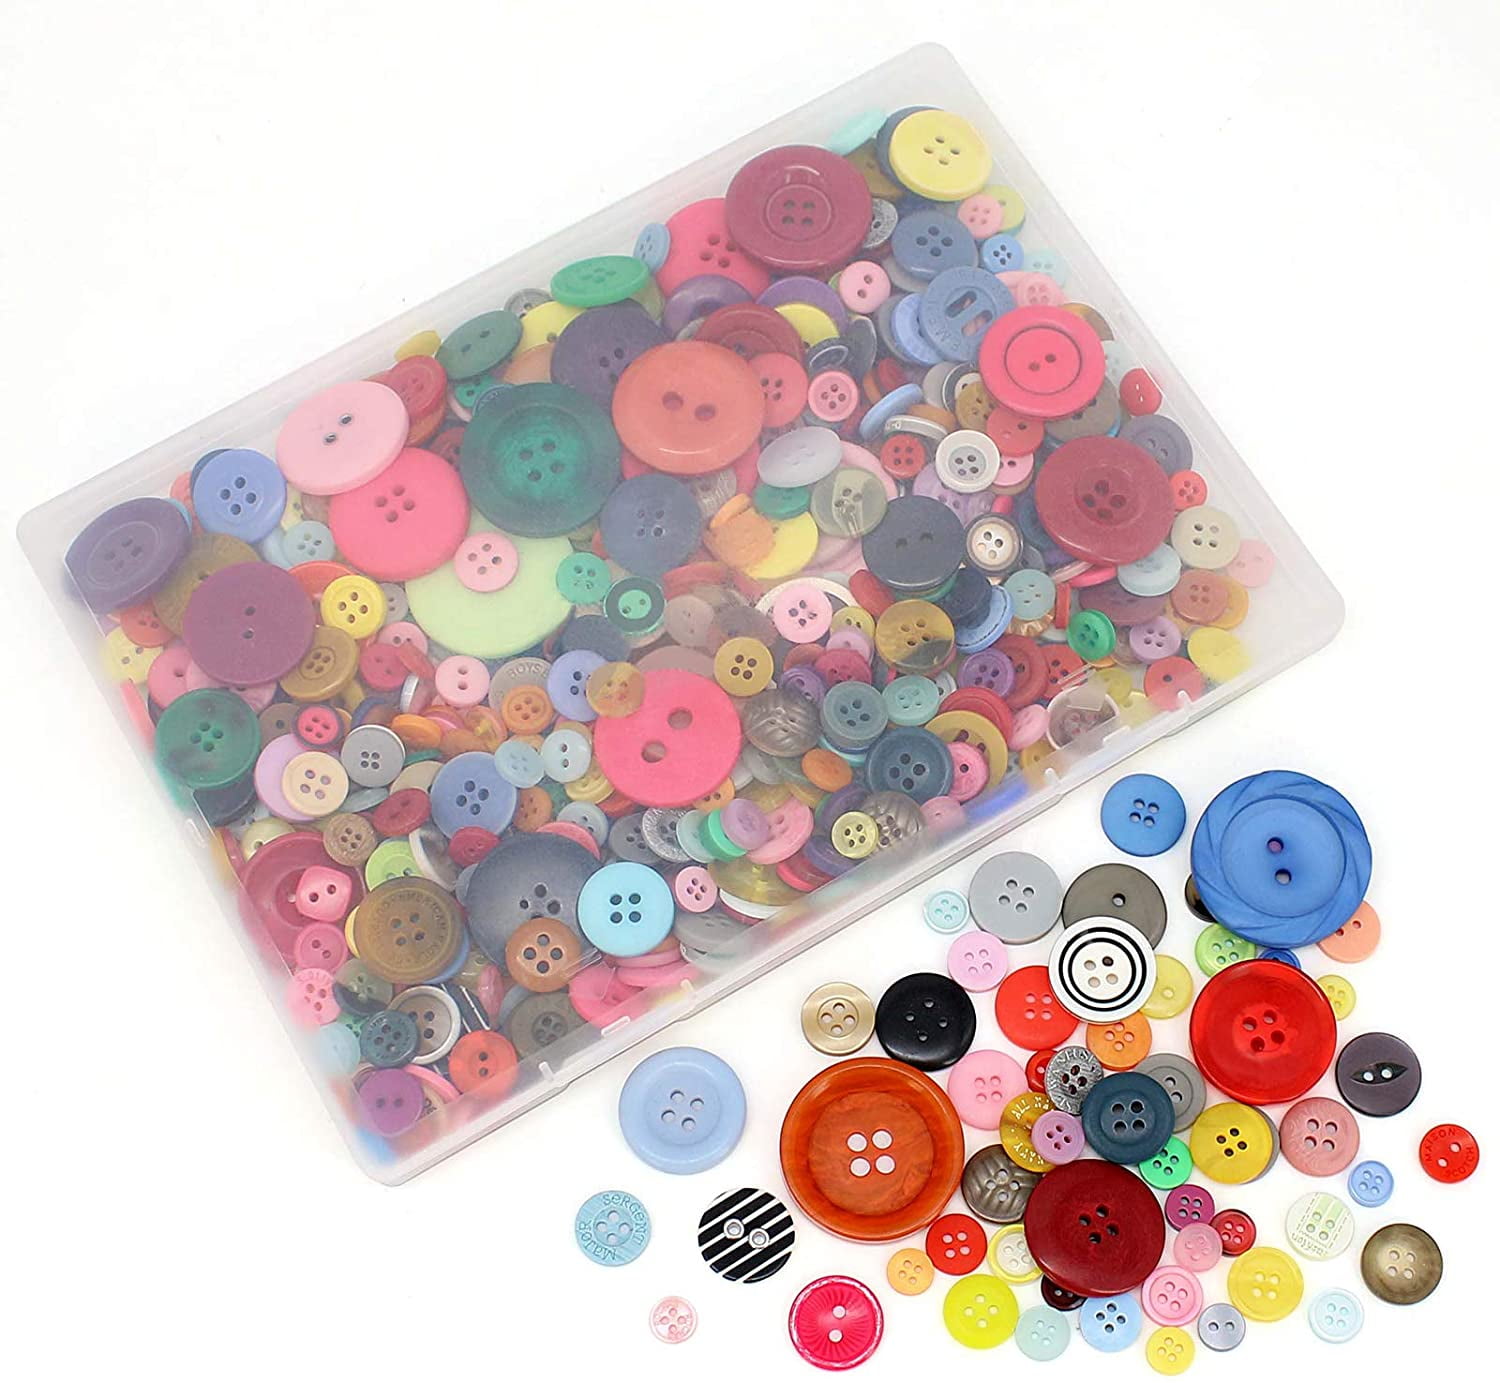 Buy 1000pcs Assorted Buttons for Crafts, Mixed Resin Buttons Multi